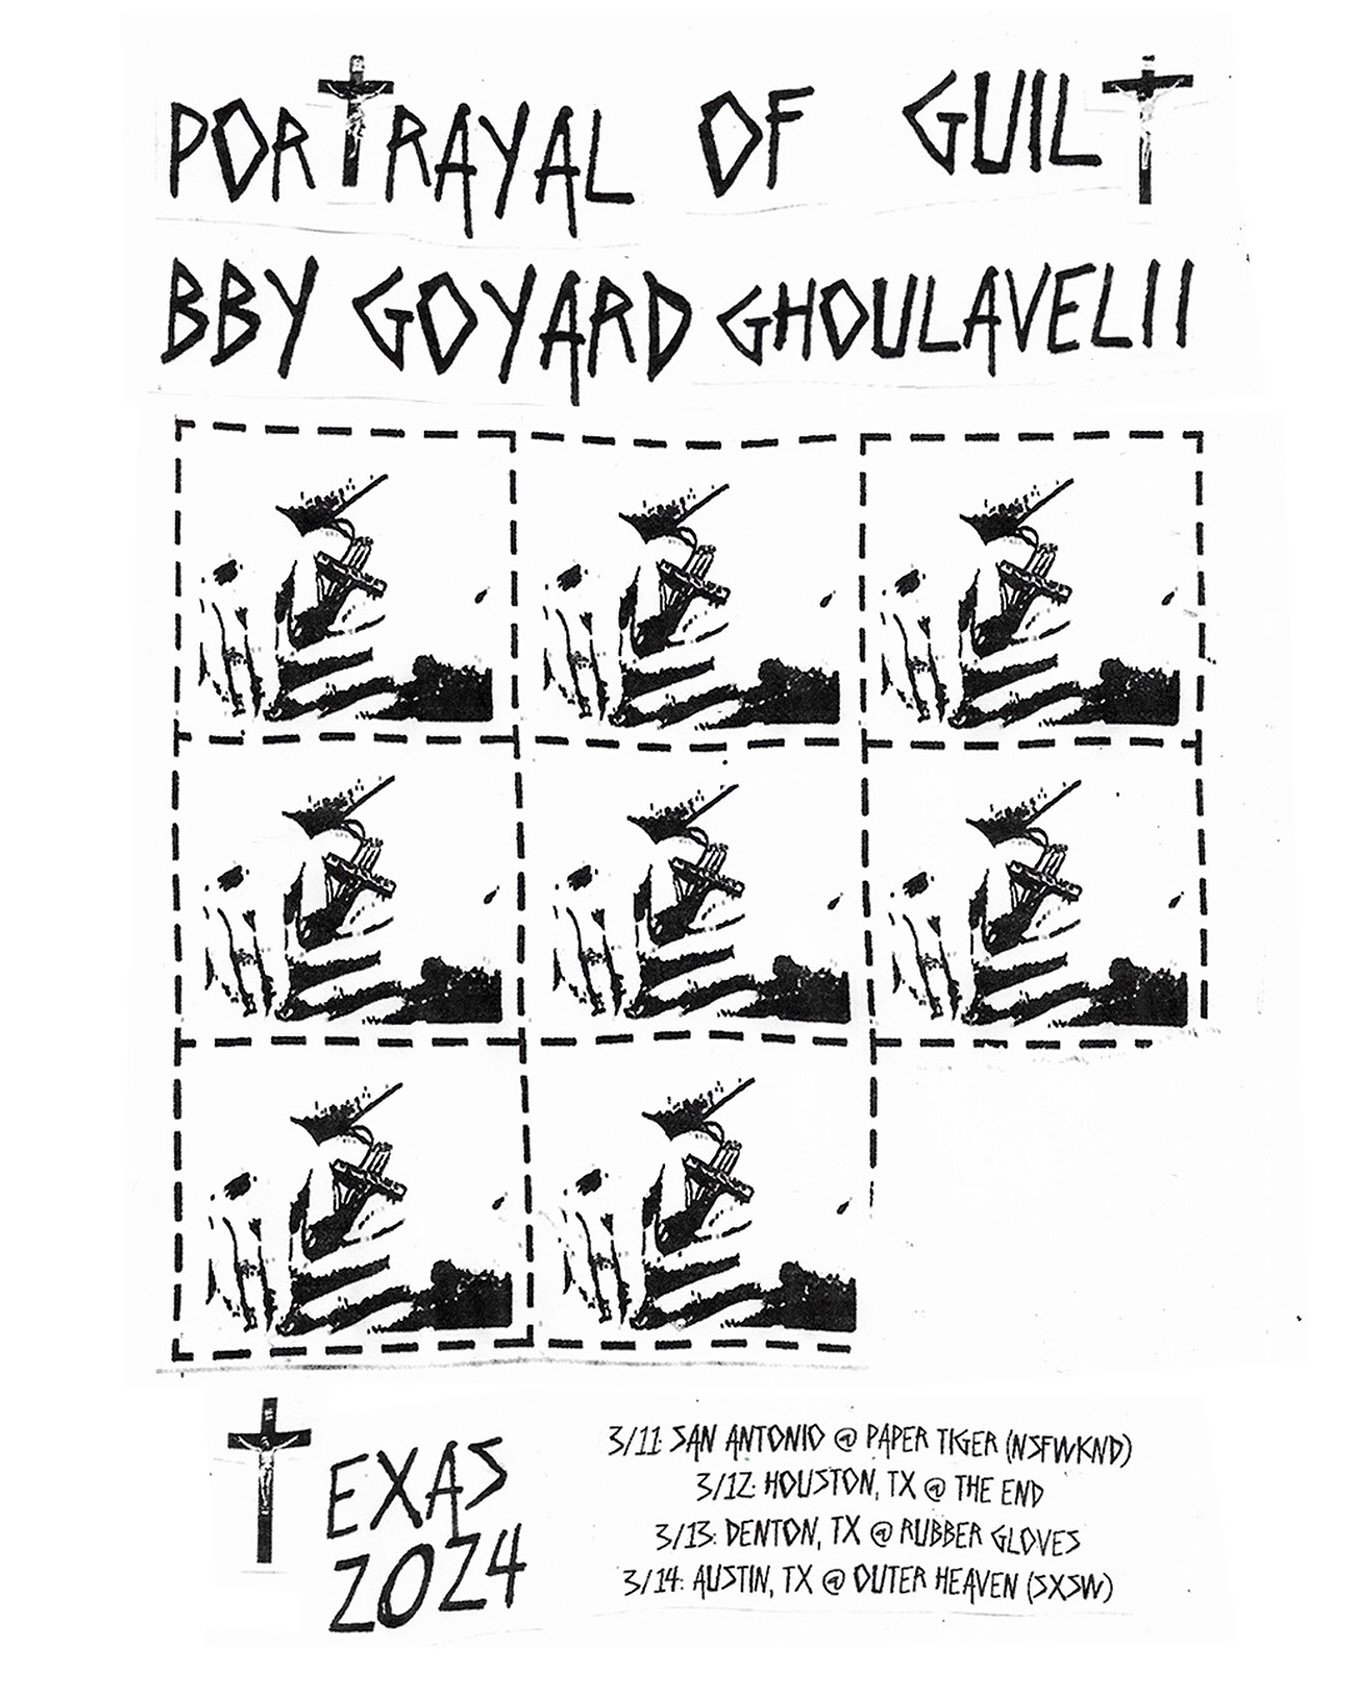 @portrayalofguilt Texas tour dates next month with @ssxbbygoyard &amp; @ghoulavelii&hellip;

Ticket link in bio.